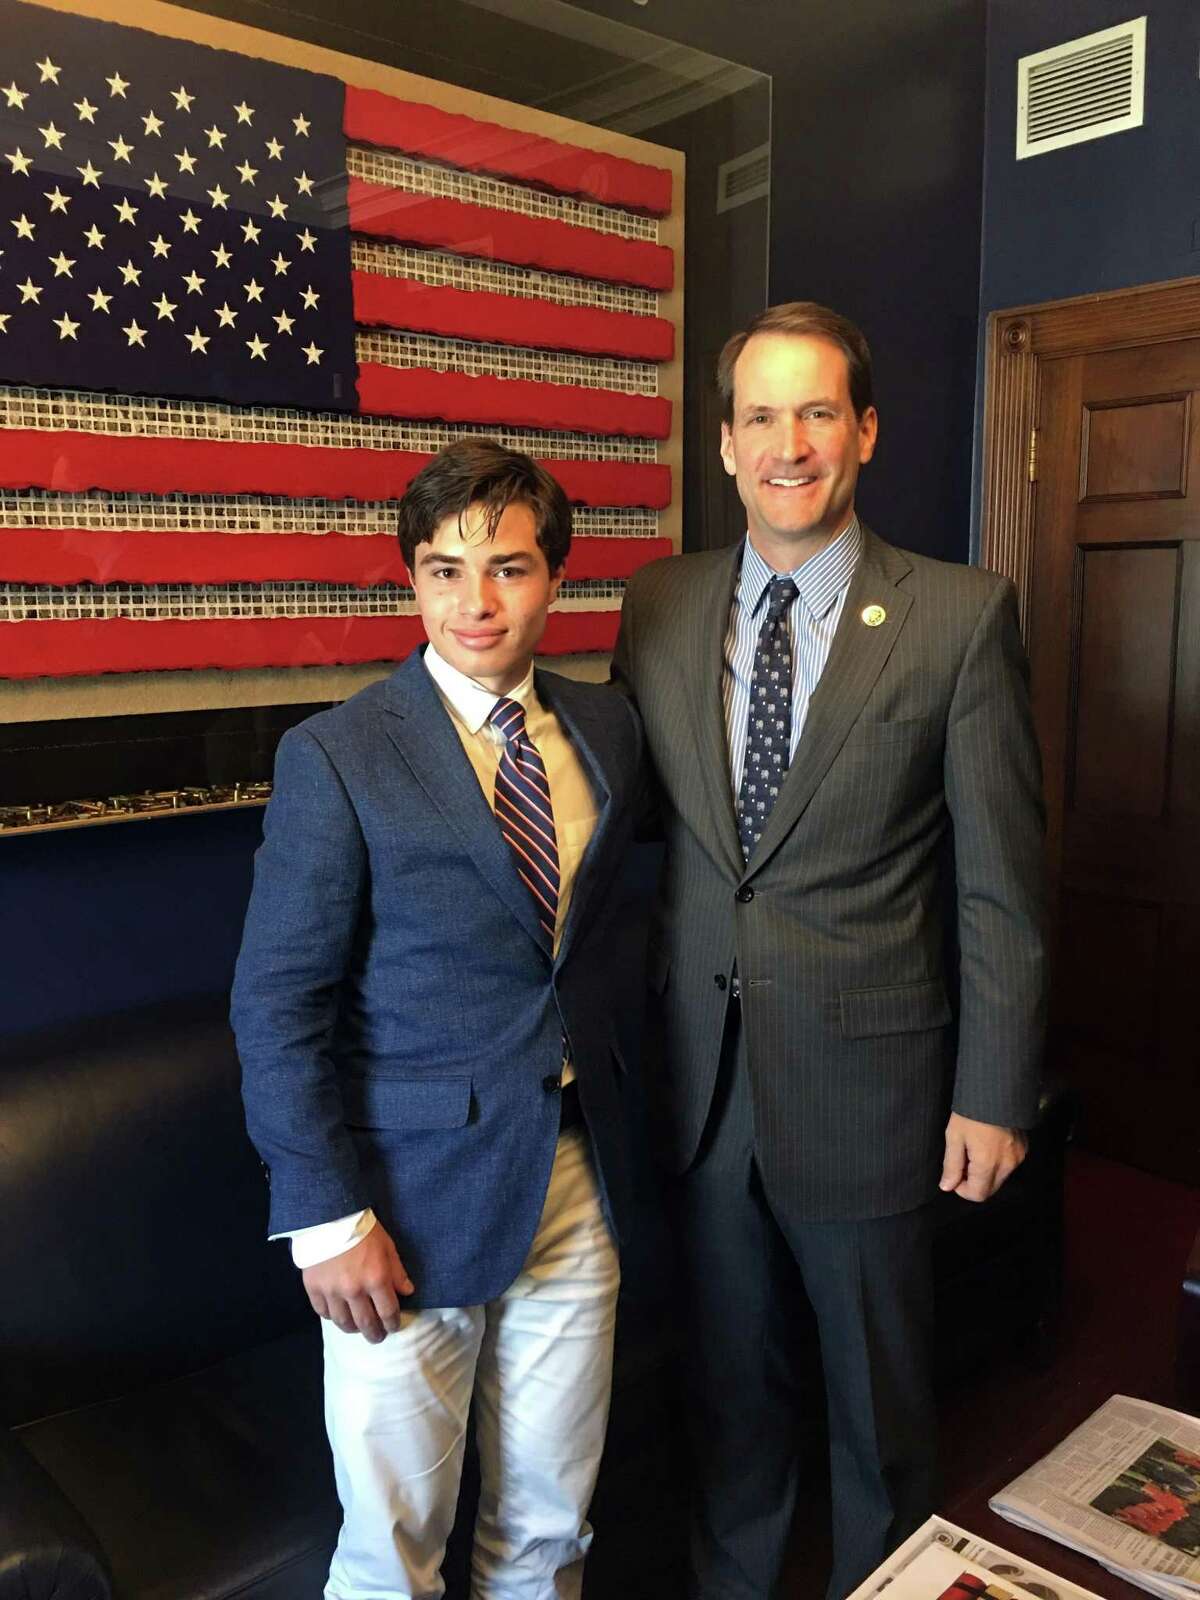 Charles Kolin and U.S. Rep. Jim Himes, D-CT, met in the nation's capital to discuss the implementation of a national "Unity Day."